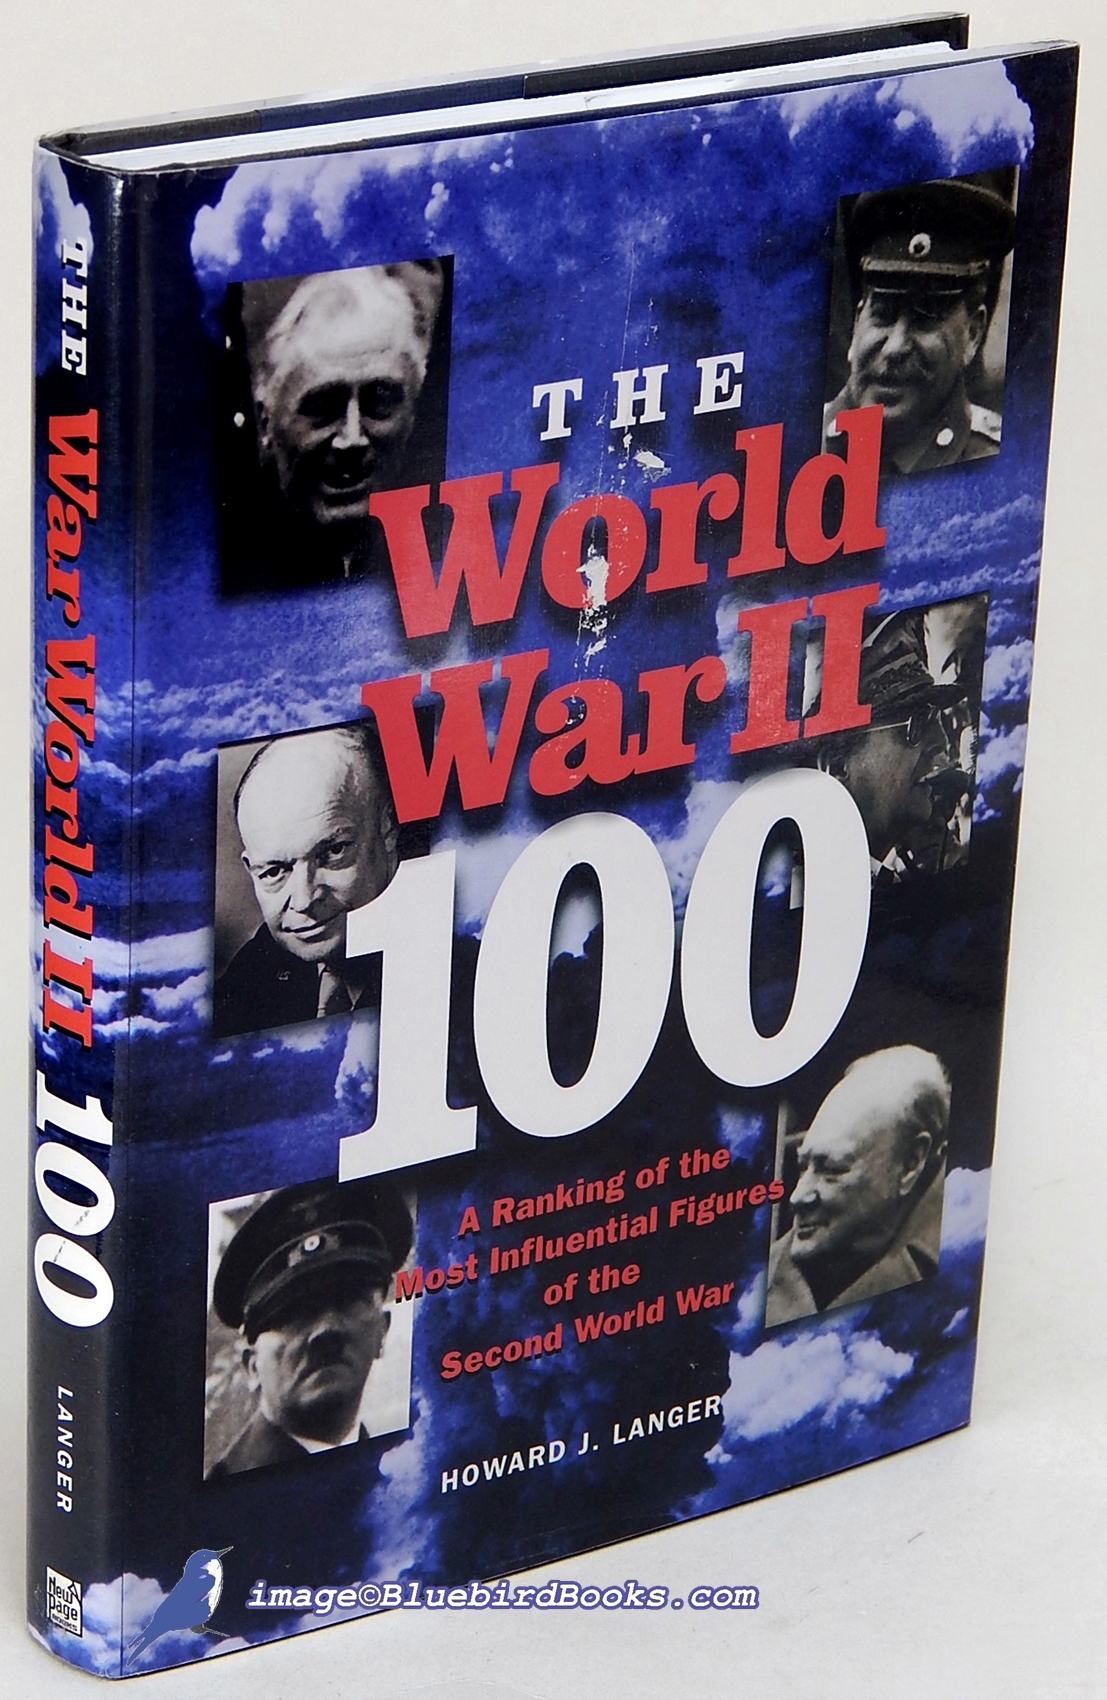 LANGER, HOWARD J. - The World War II 100: A Ranking of the Most Influential Figures of the Second World War